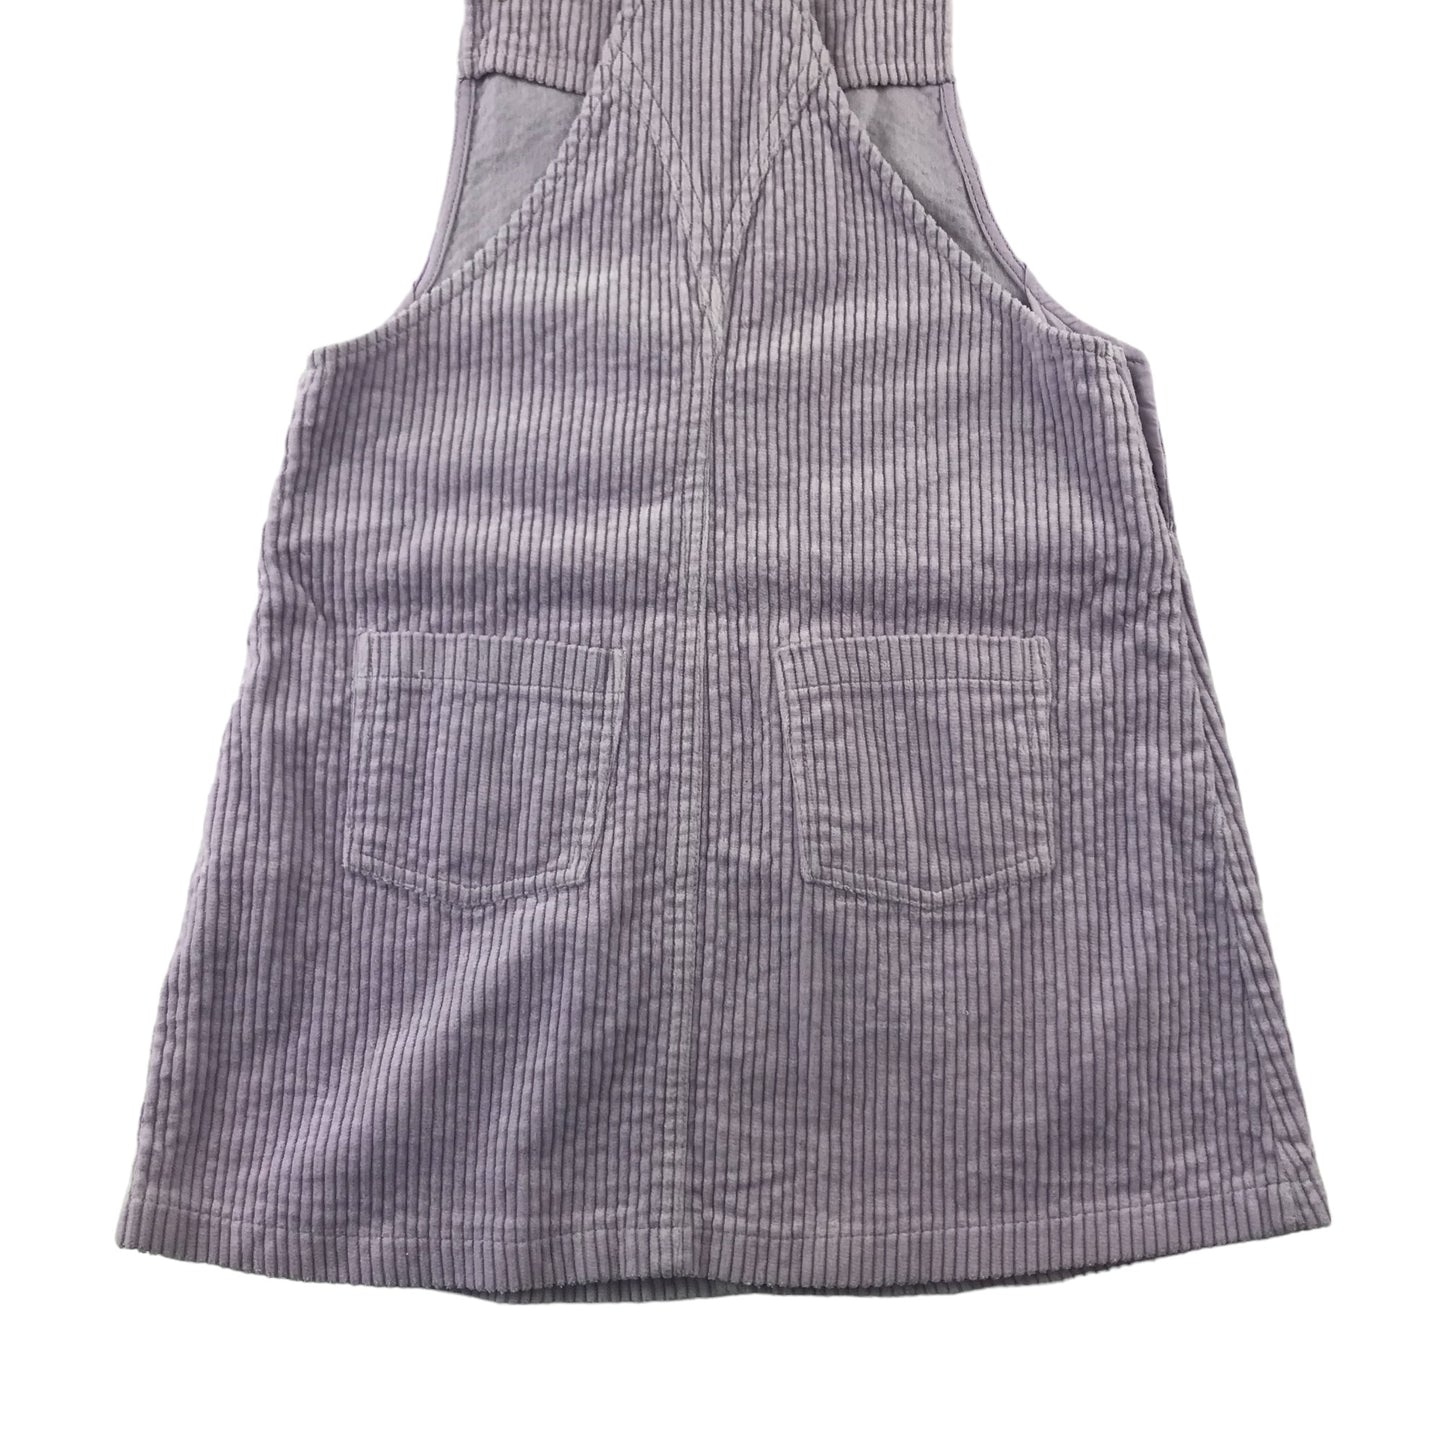 M&S Dress 7-8 years Lilac Corduroy Dungaree Cotton